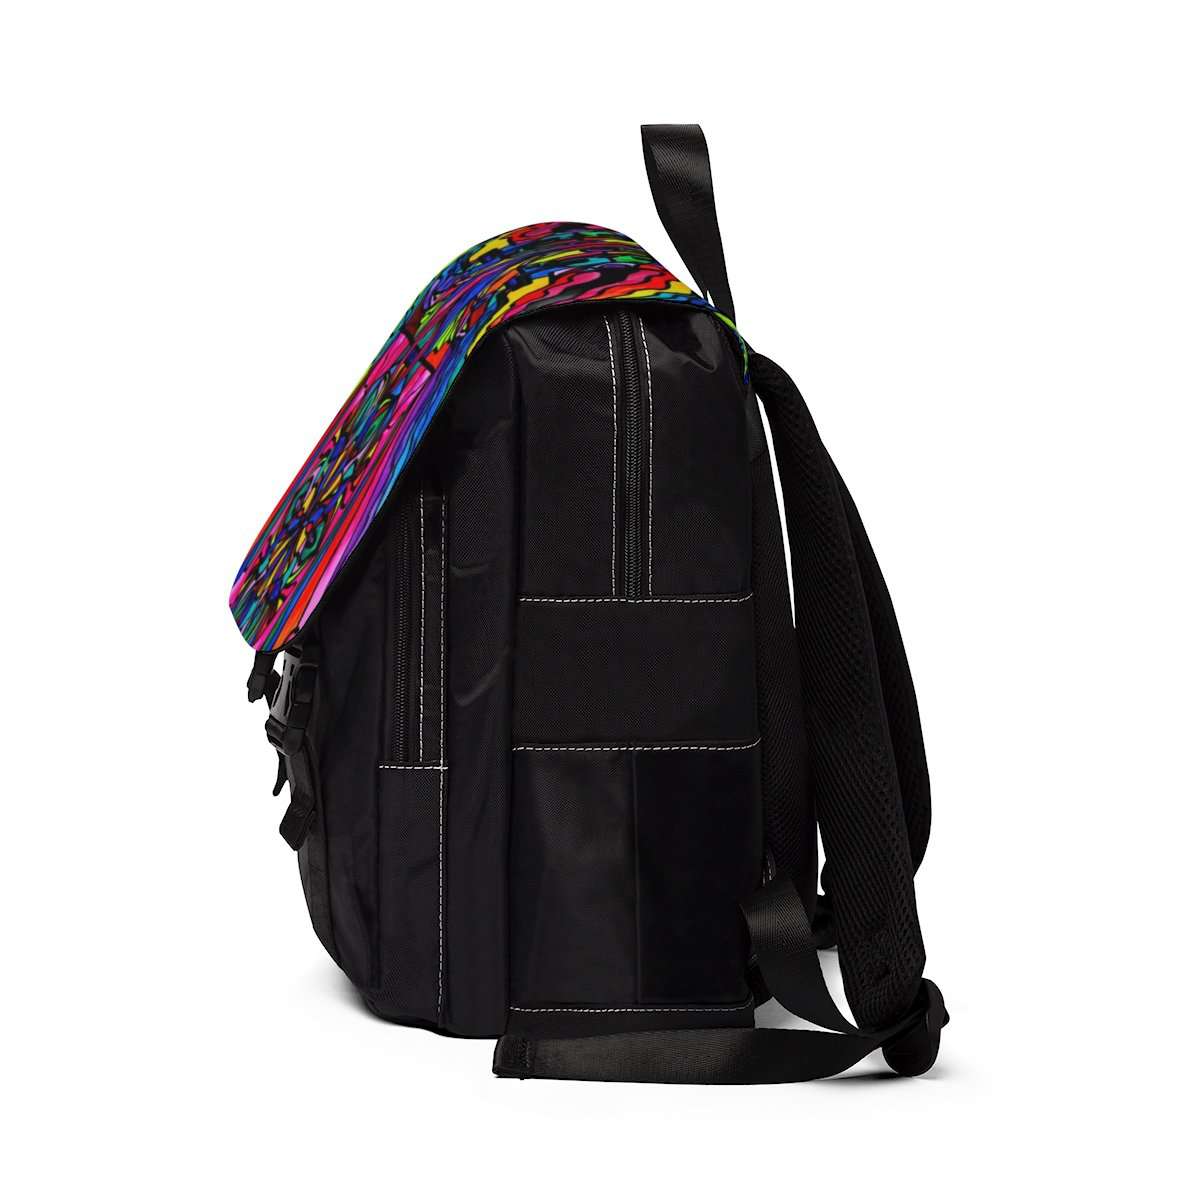 get-your-favorite-non-attachment-unisex-casual-shoulder-backpack-on-sale_2.jpg